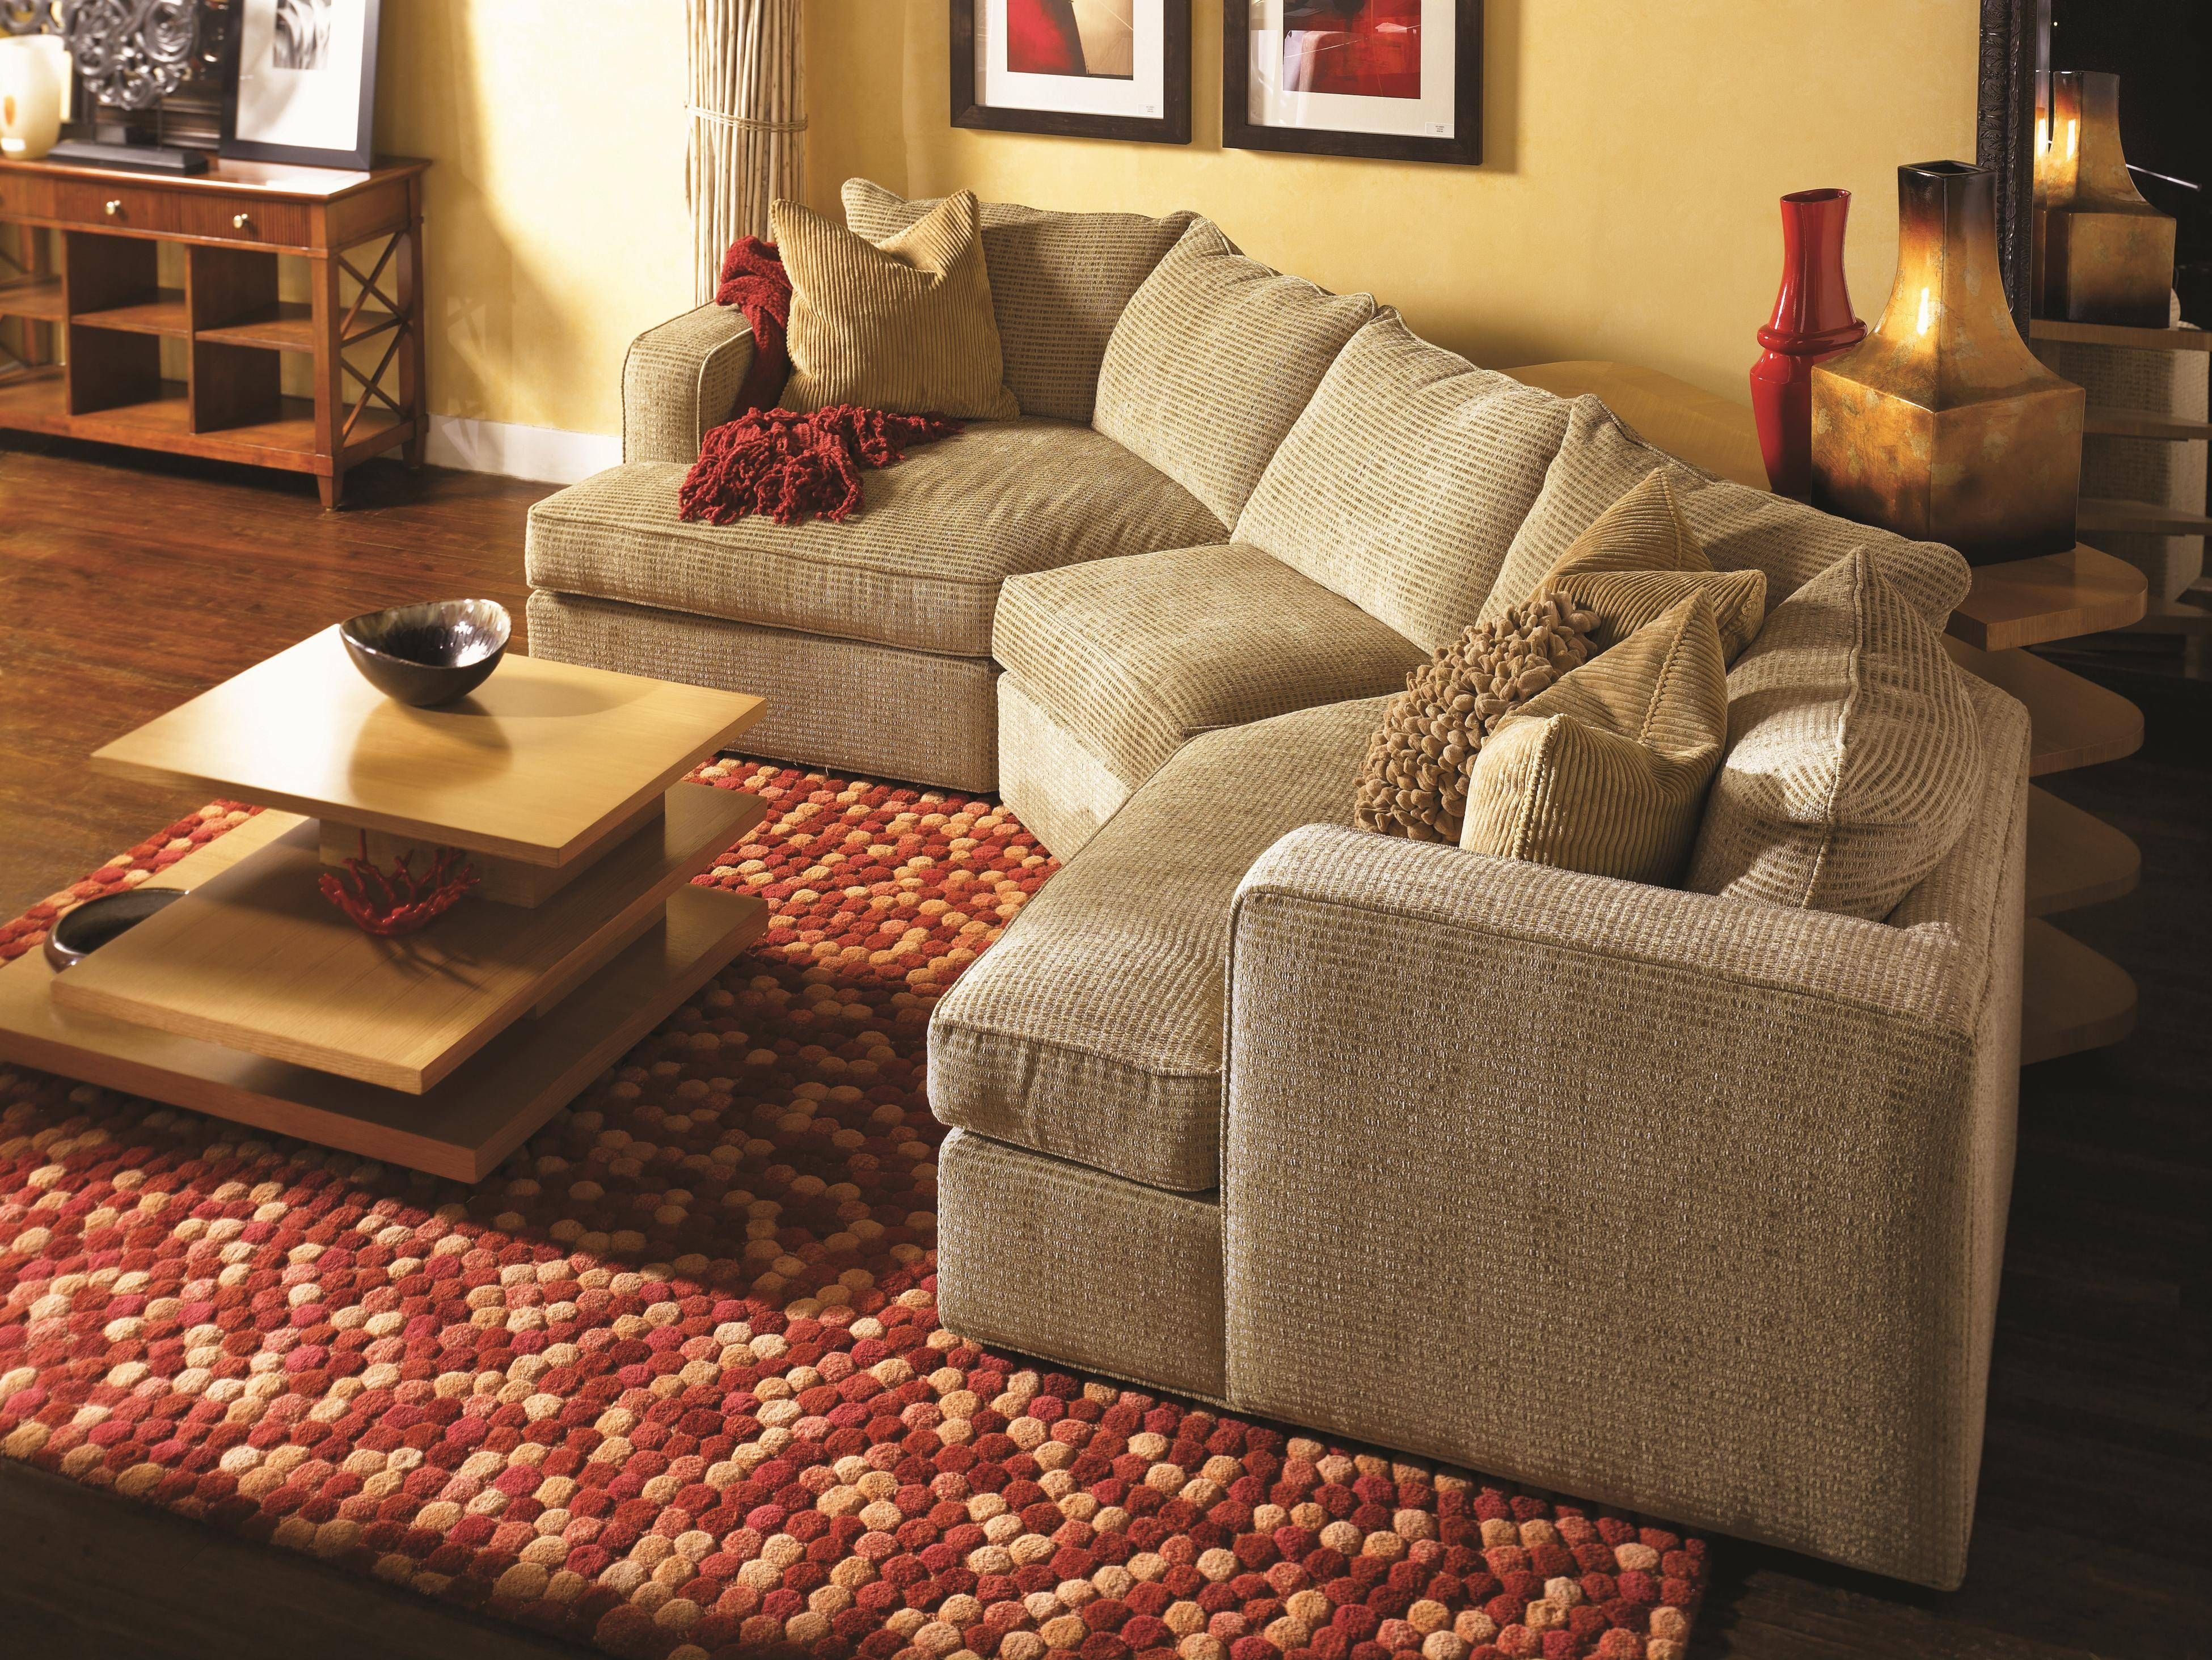 Norwalk Milford Sectional Sofa With Track Arms, Loose Back In Angled Chaise Sofa (View 13 of 30)